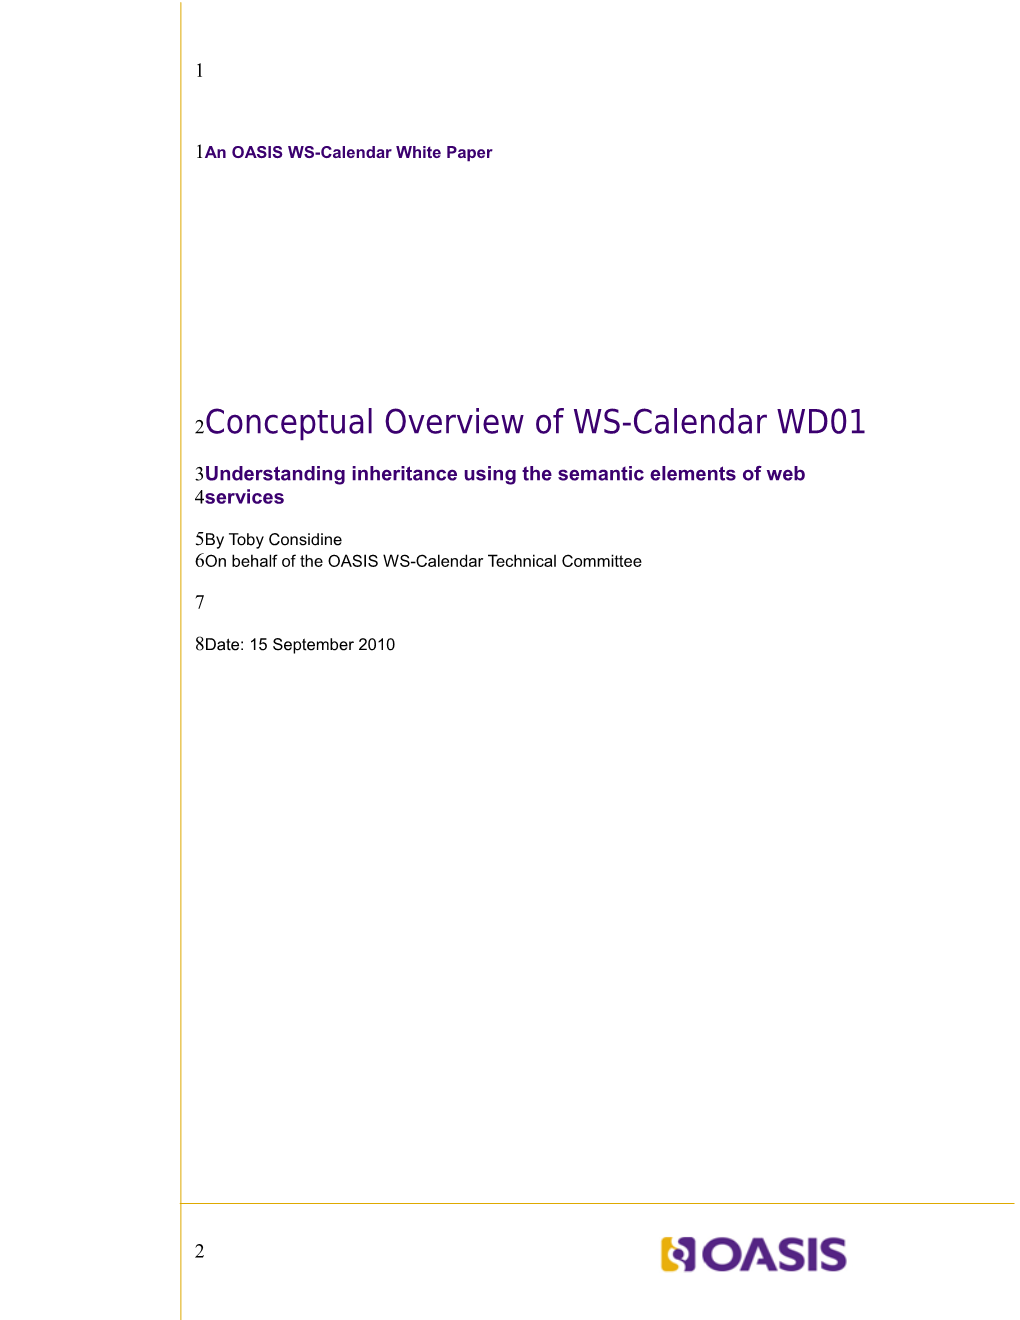 Conceptual Overview of WS-Calendar WD01